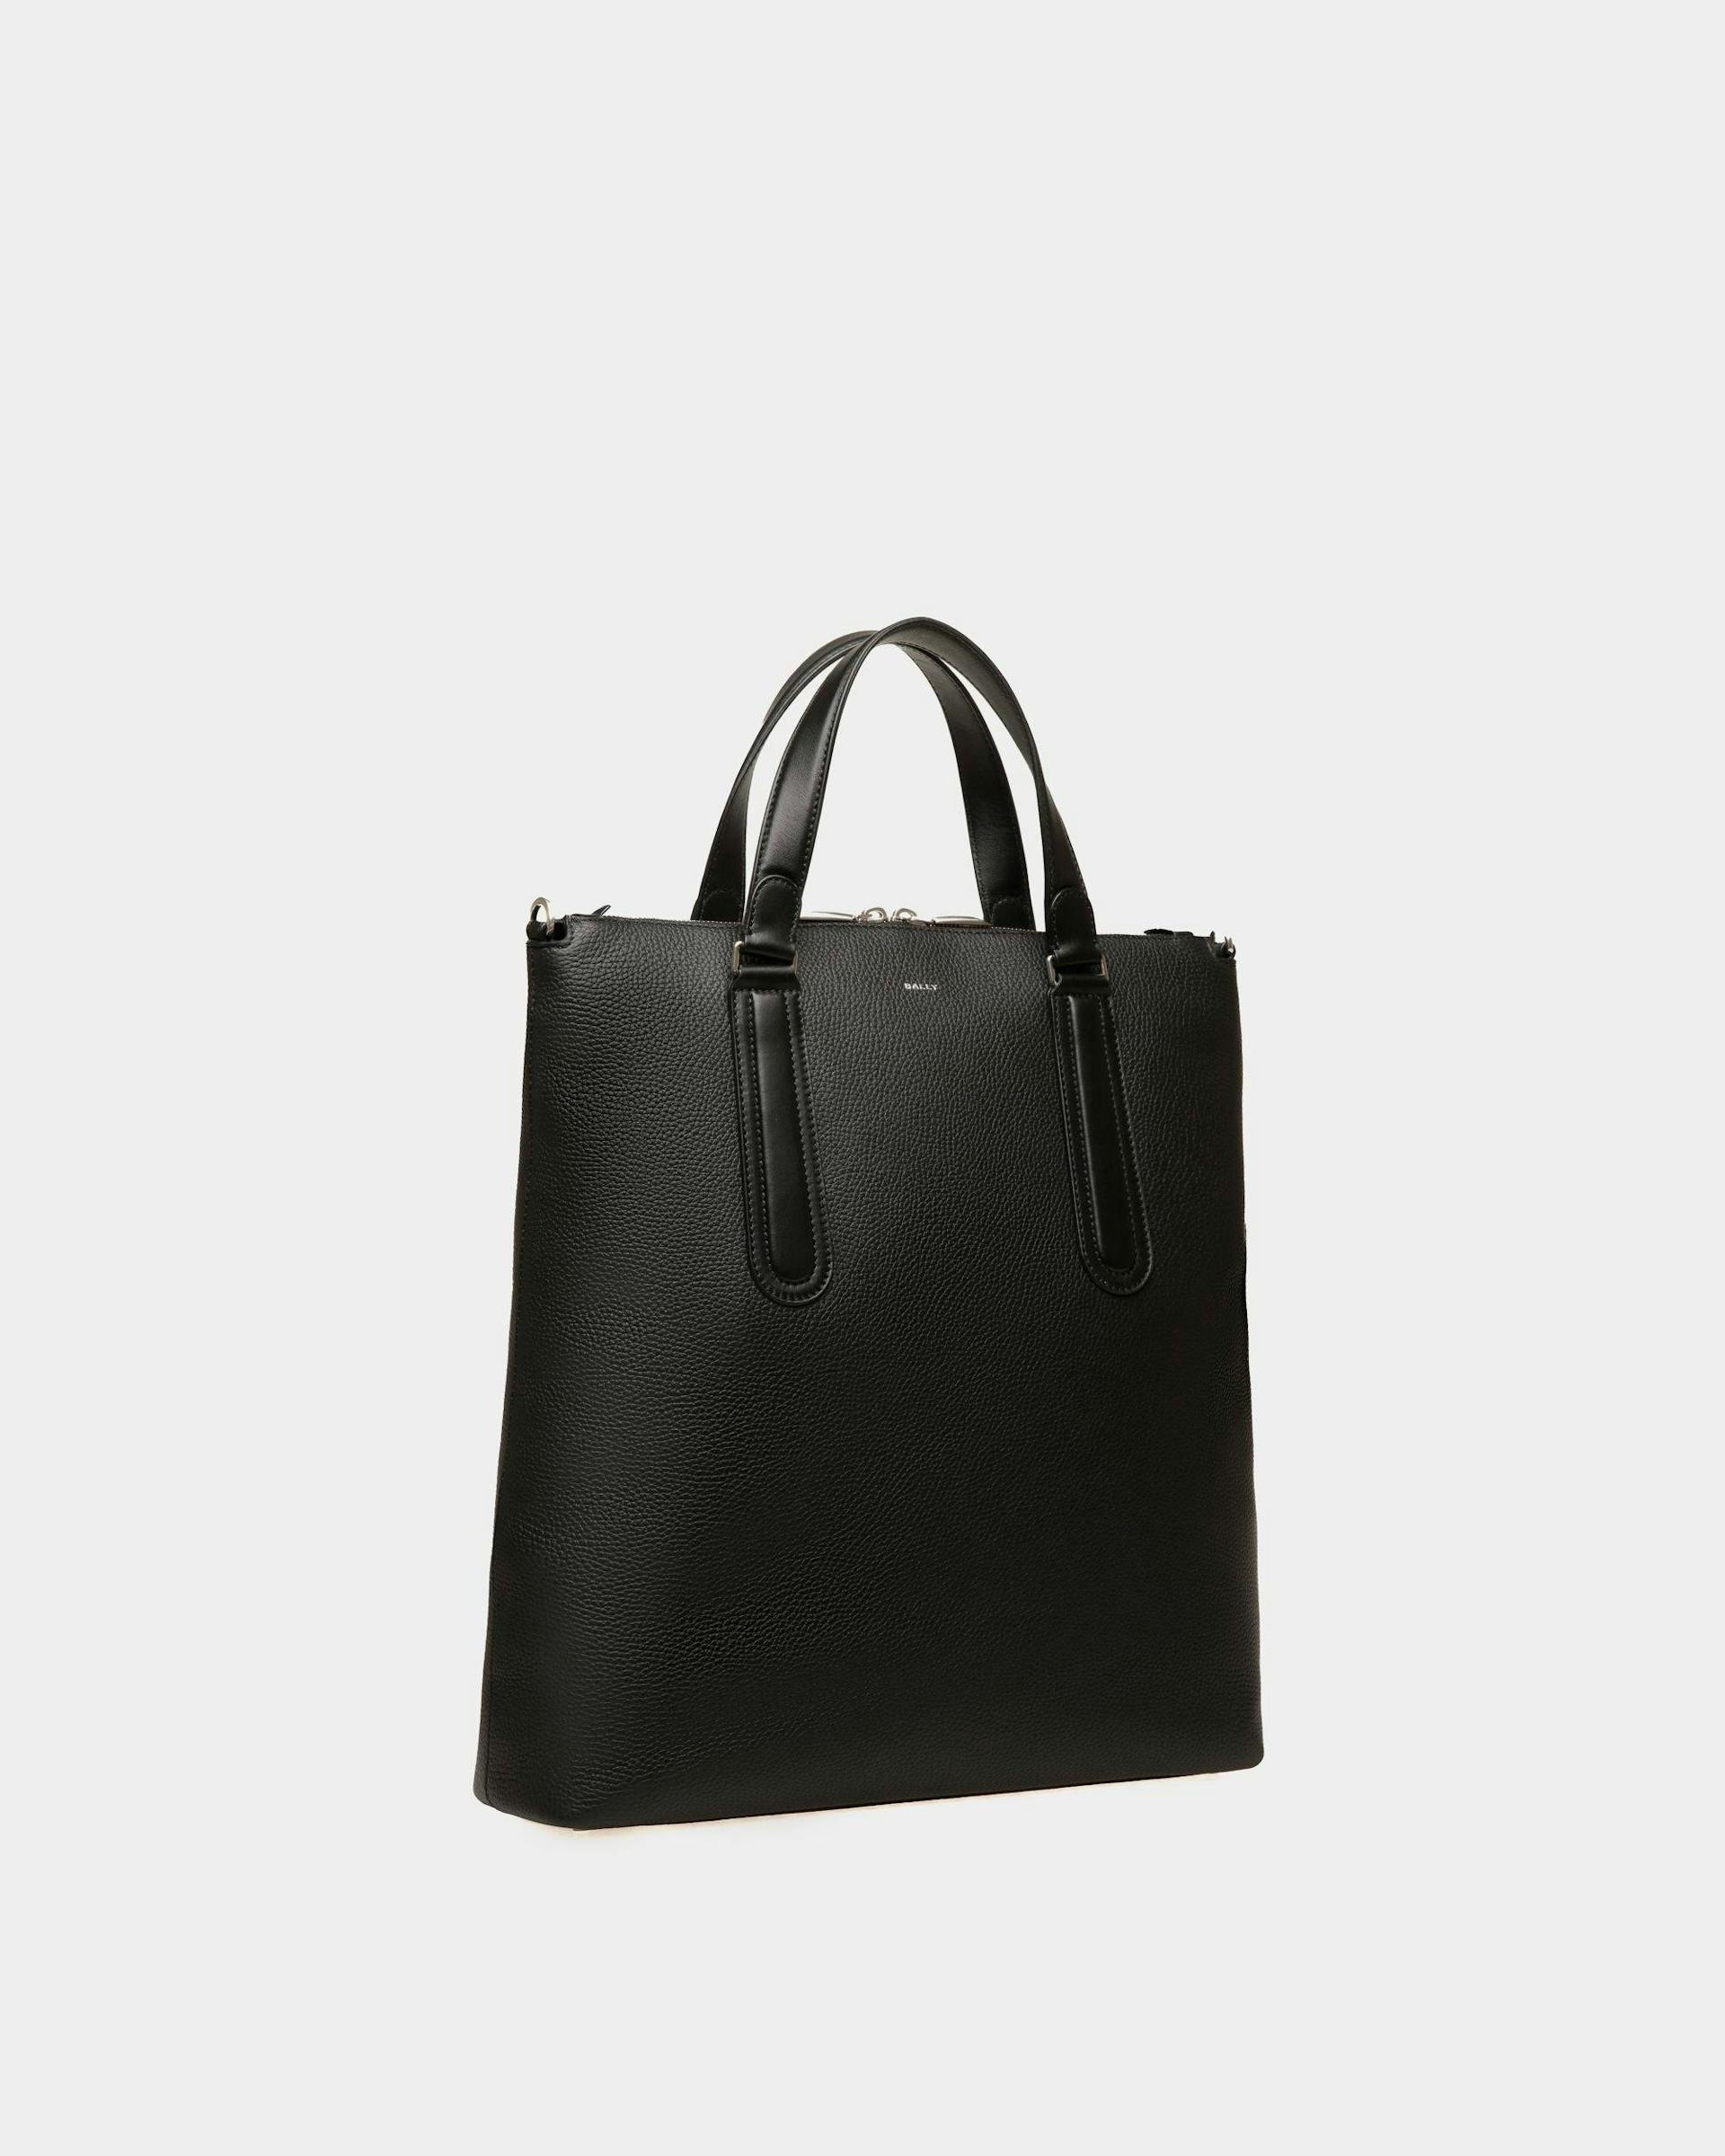 Men's Spin Tote in Black Grained Leather | Bally | Still Life 3/4 Front